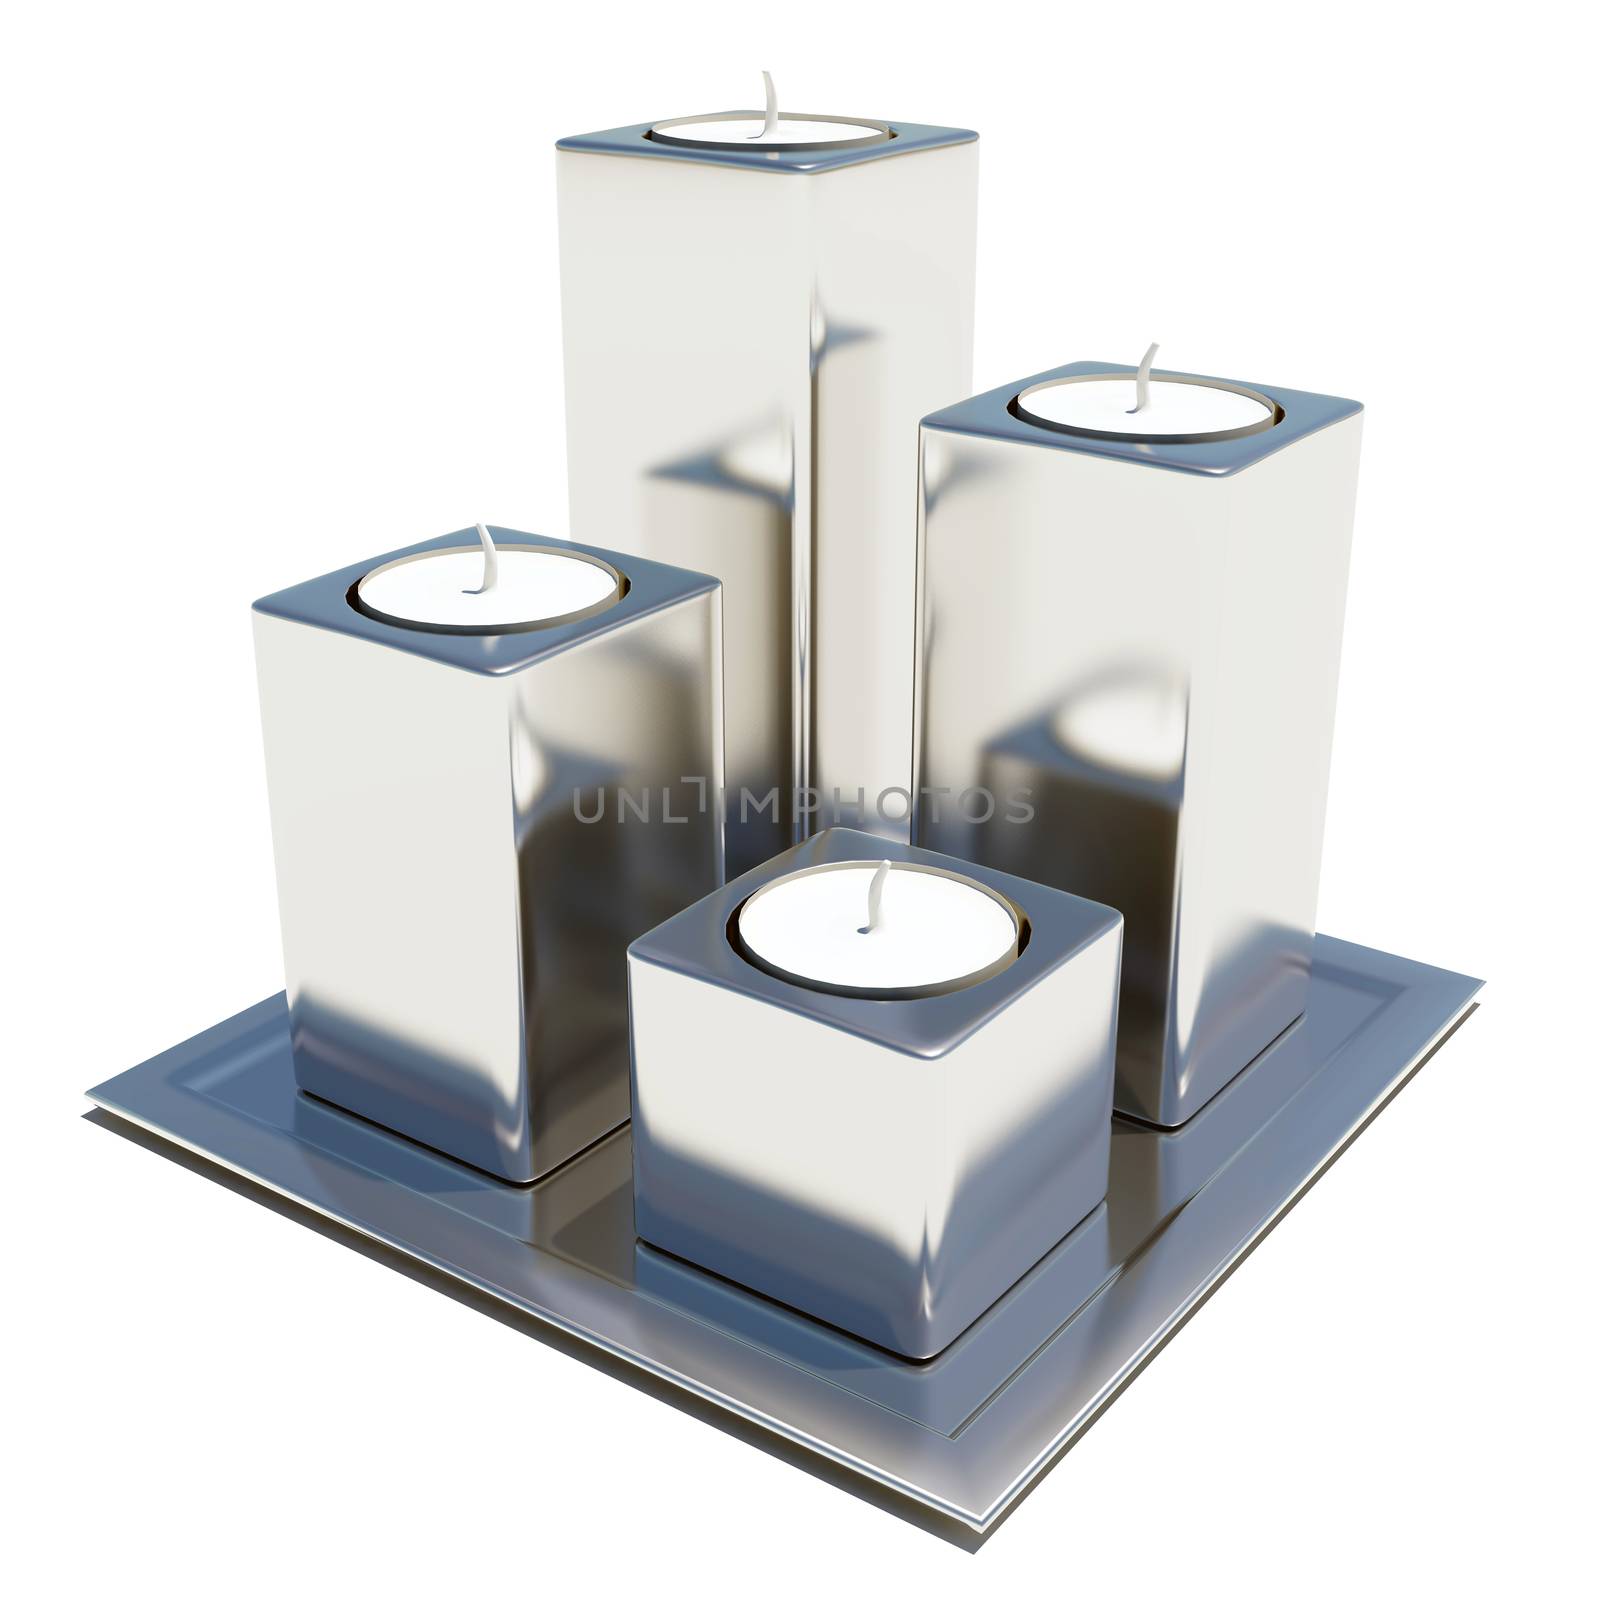 Four silver or stainless steel round and white wax candle holders, isolated against a white background, on a square platter.